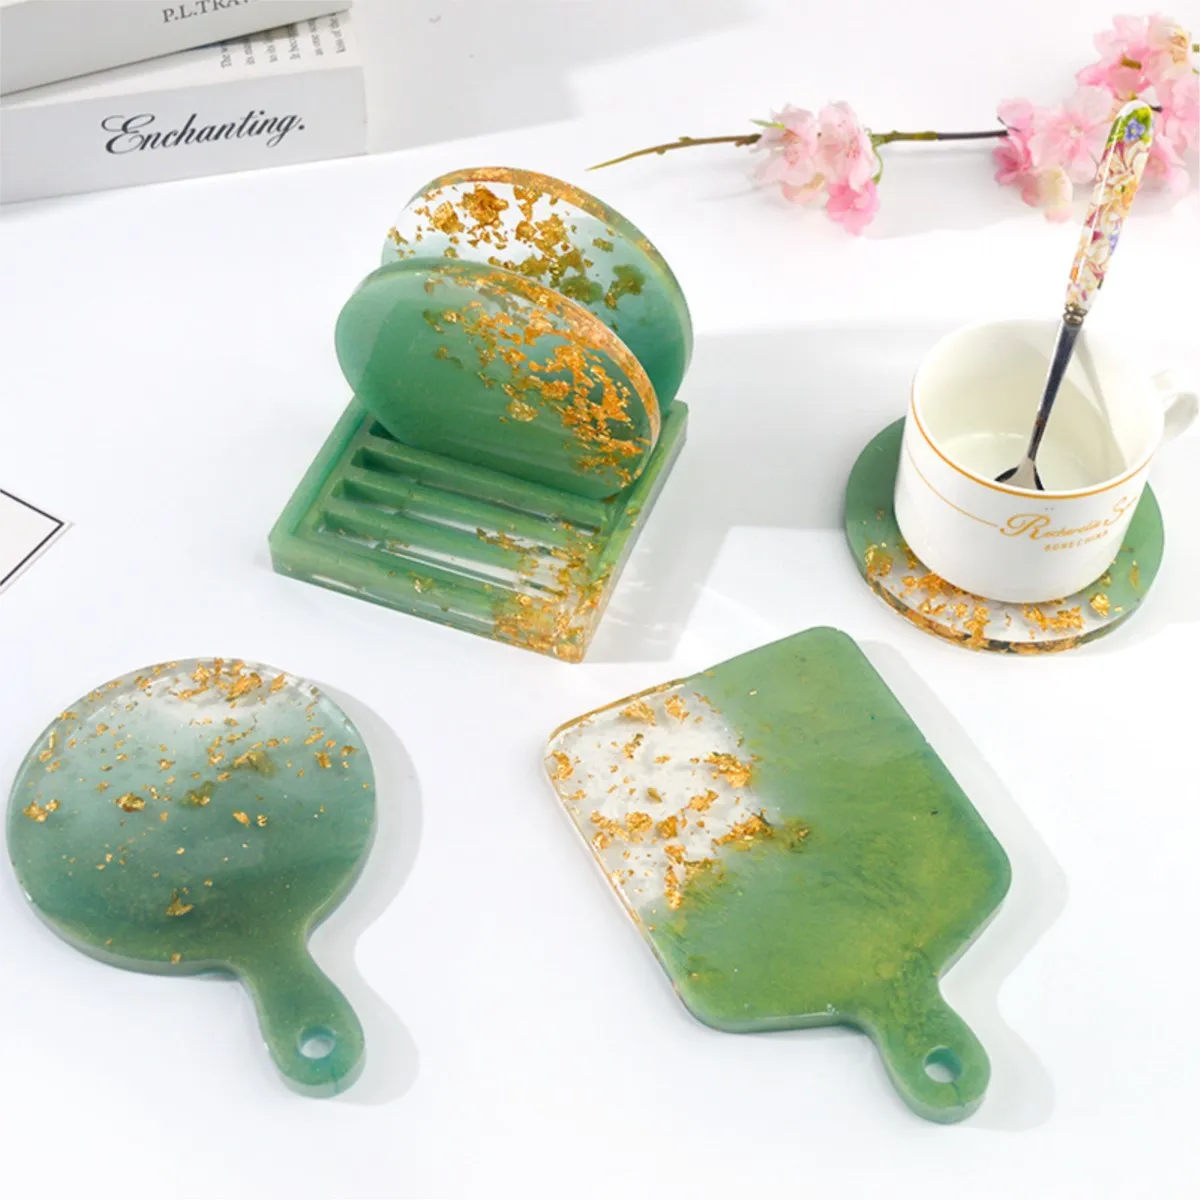 

DIY Glue Dripping Flower Coaster Storage Rack Silicone Mold Drain Cup Holder Creative Cup Holder Base Home Craft Mould Tool